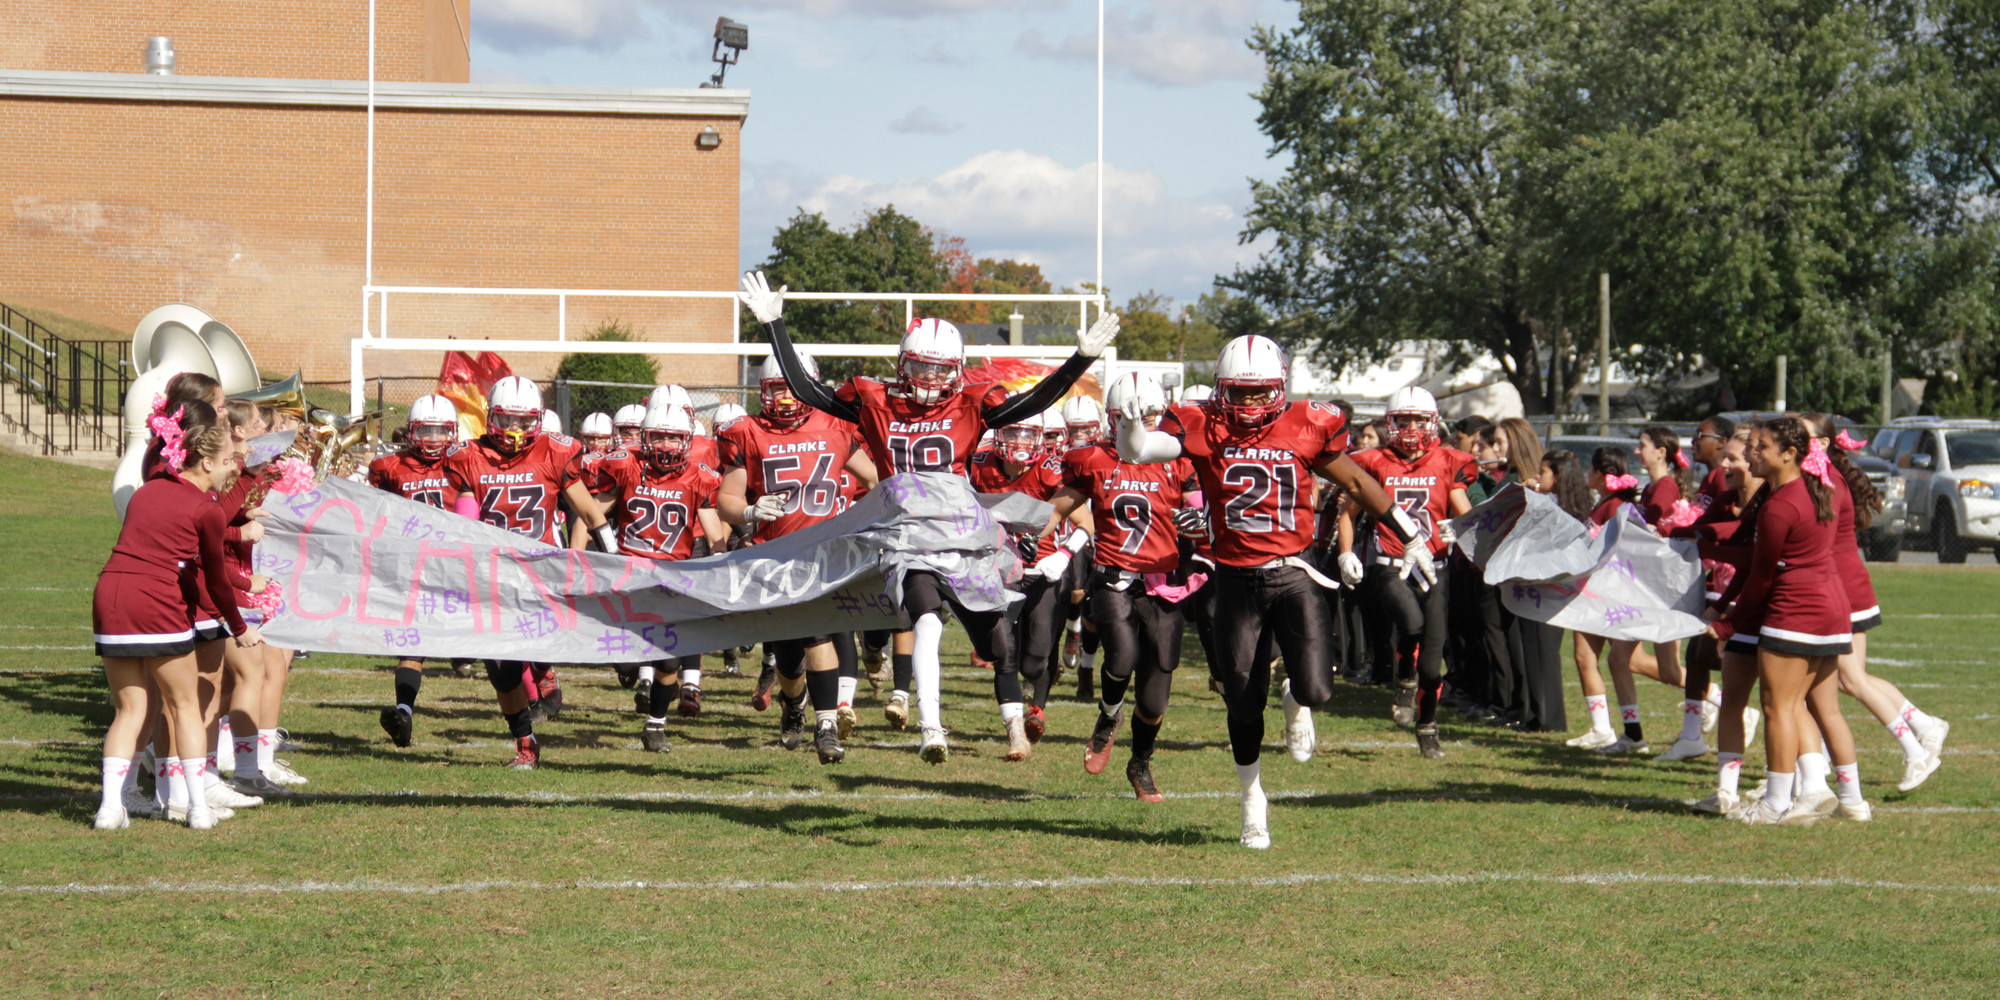 The Clarke football team, led by running back Aaron Dawson (21), took the field for Saturday’s Homecoming game against visiting Island Trees. The Rams won, 34-8.